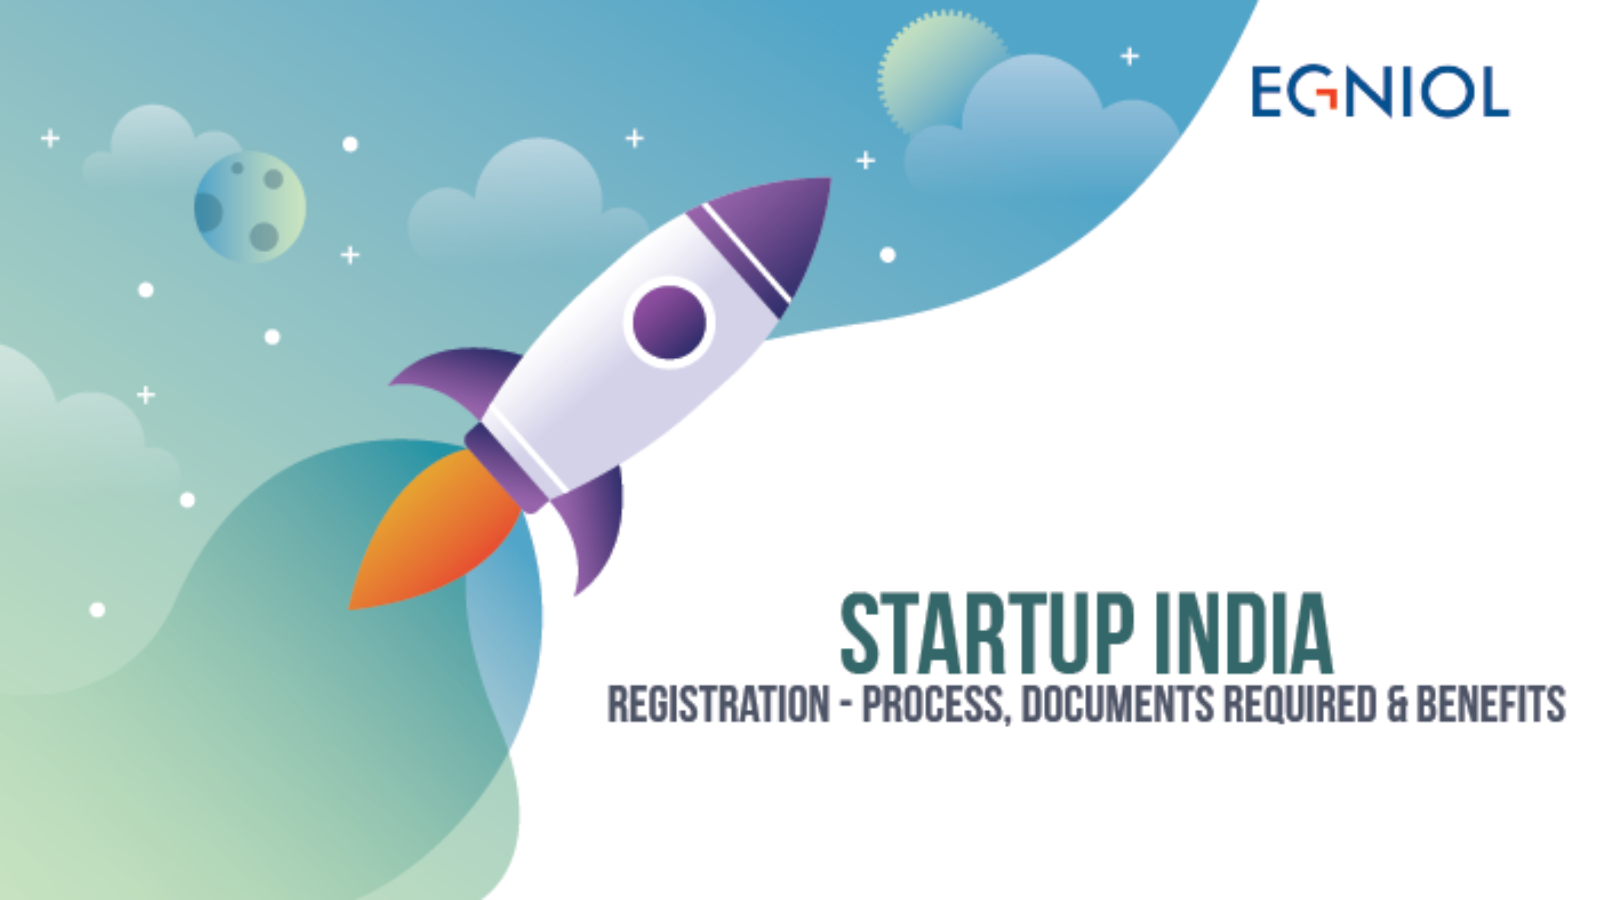 Startup India Registration Process, Documents Required & Benefits - By Egniol